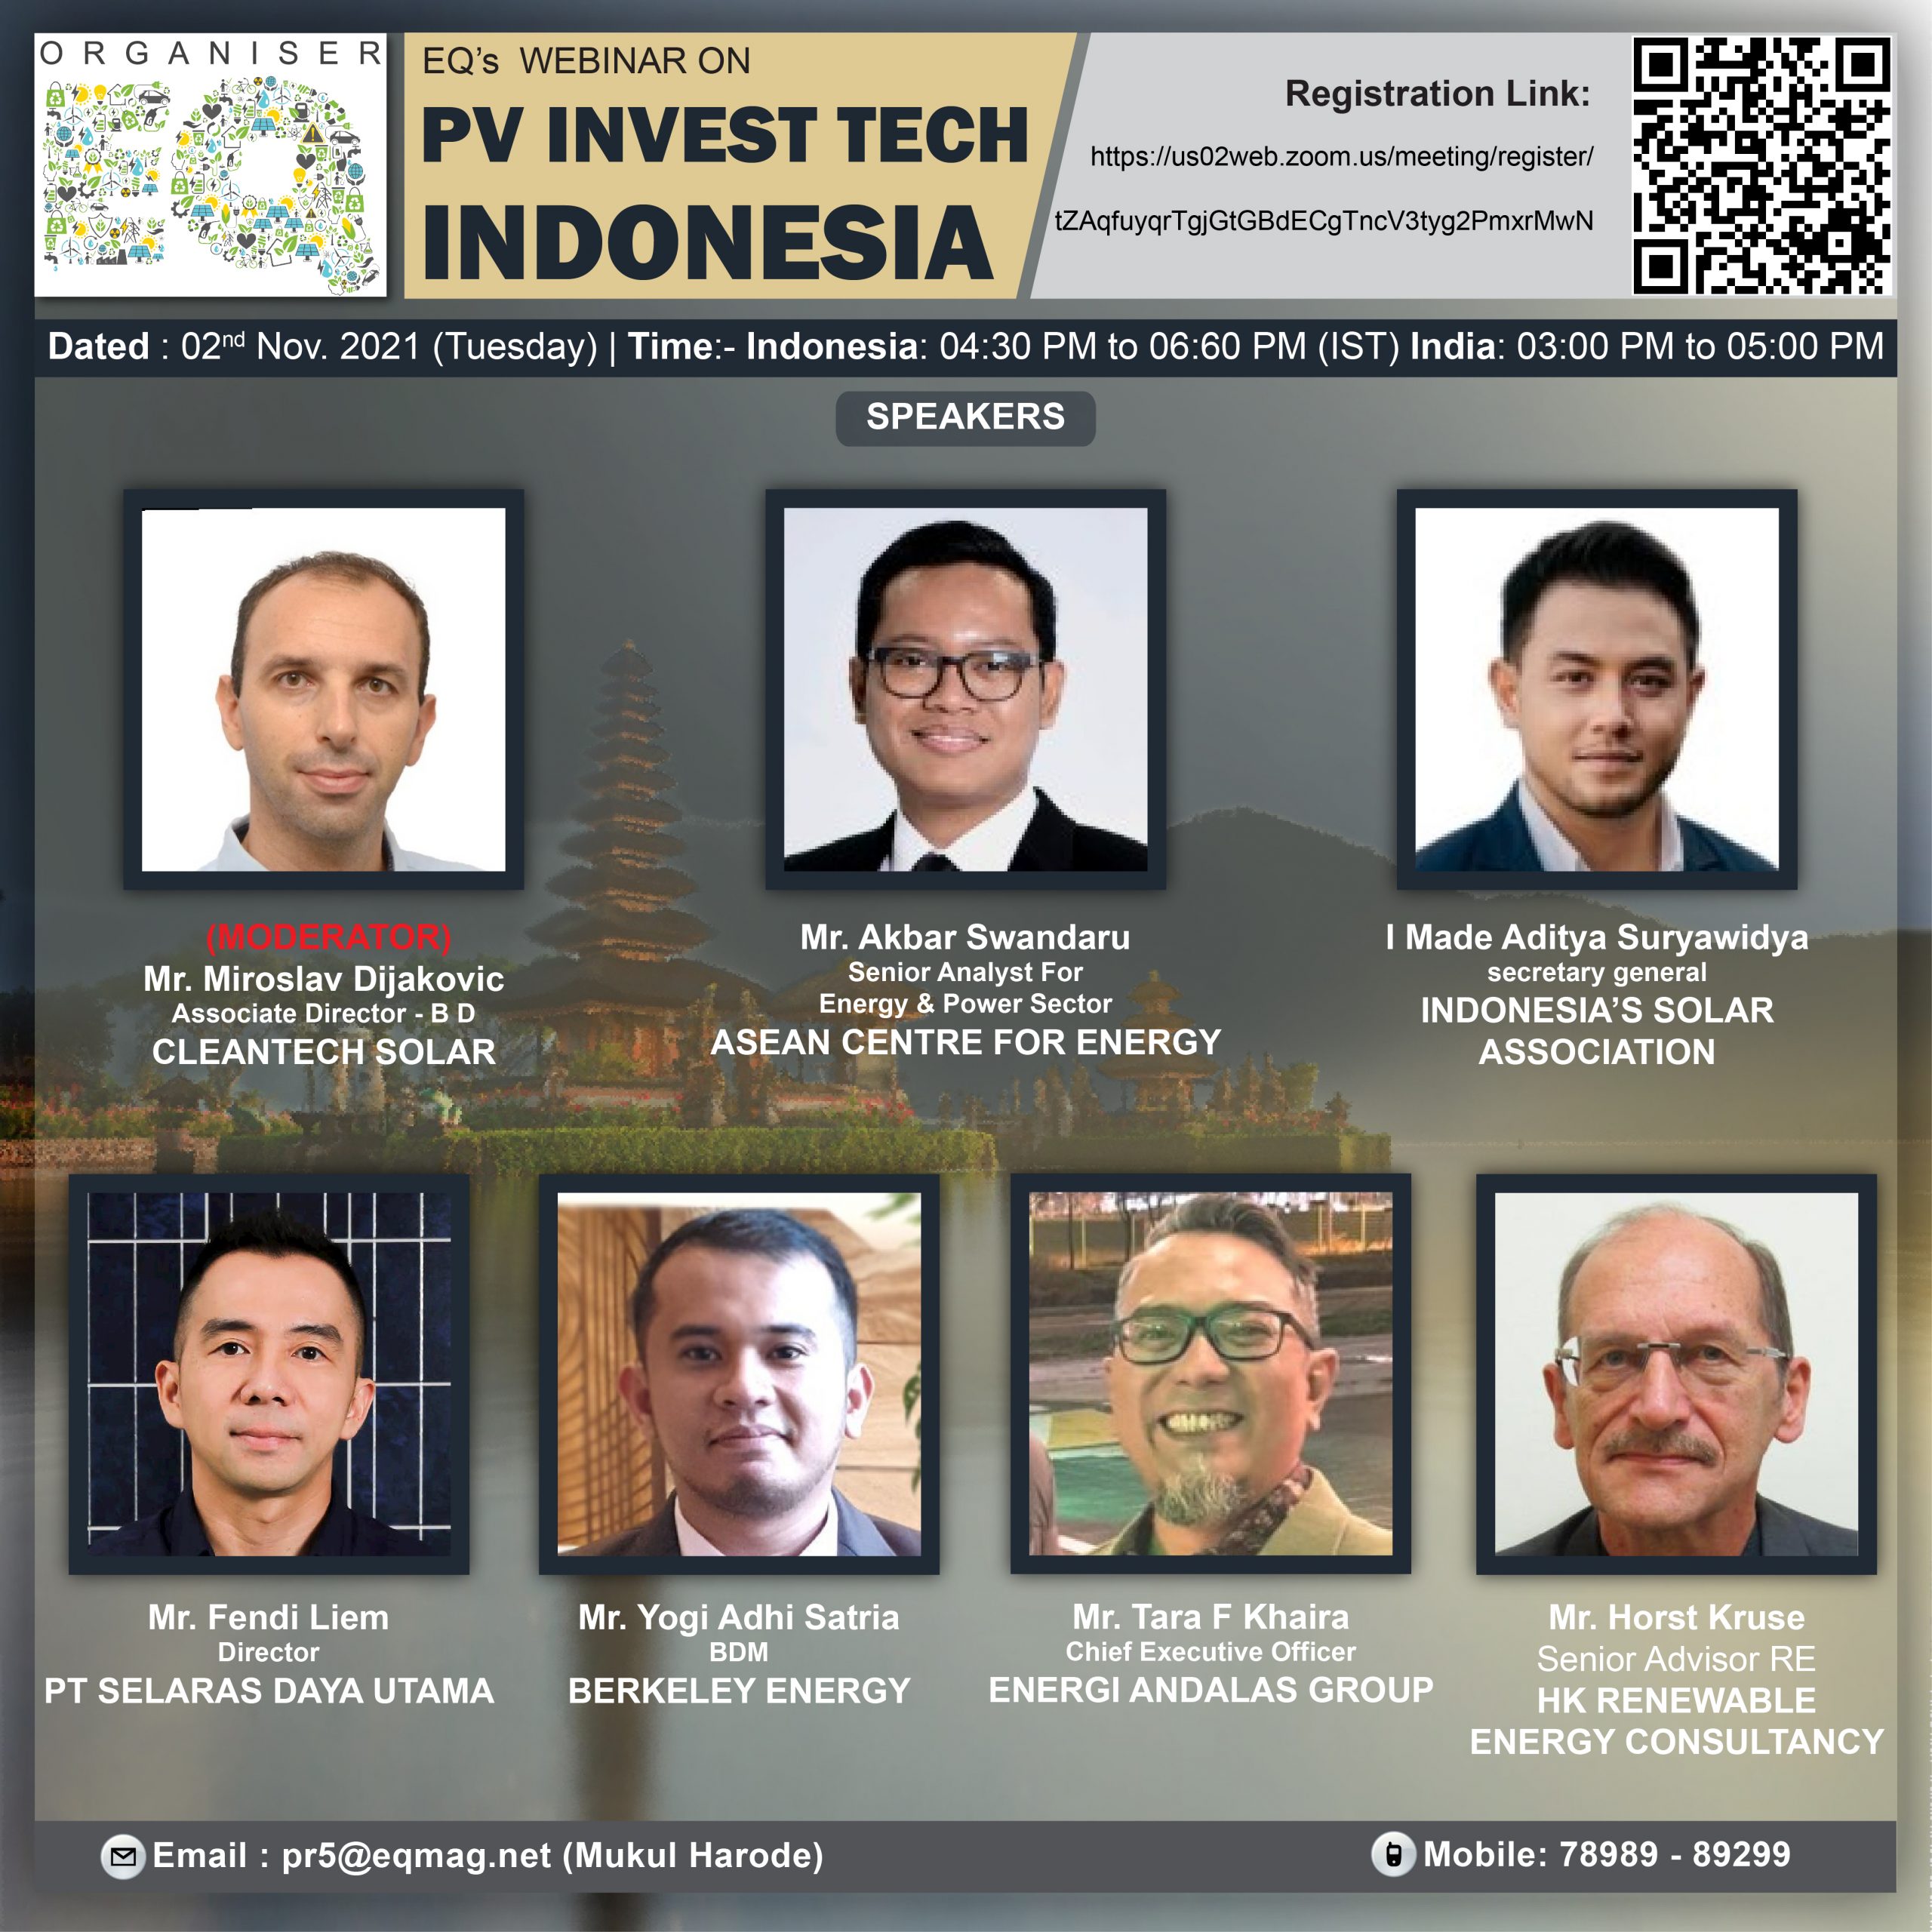 EQ Webinar on Indonesia PV Invest Tech On Tuesday November 2nd From 4:30 PM Onwards…. Register Now !!!